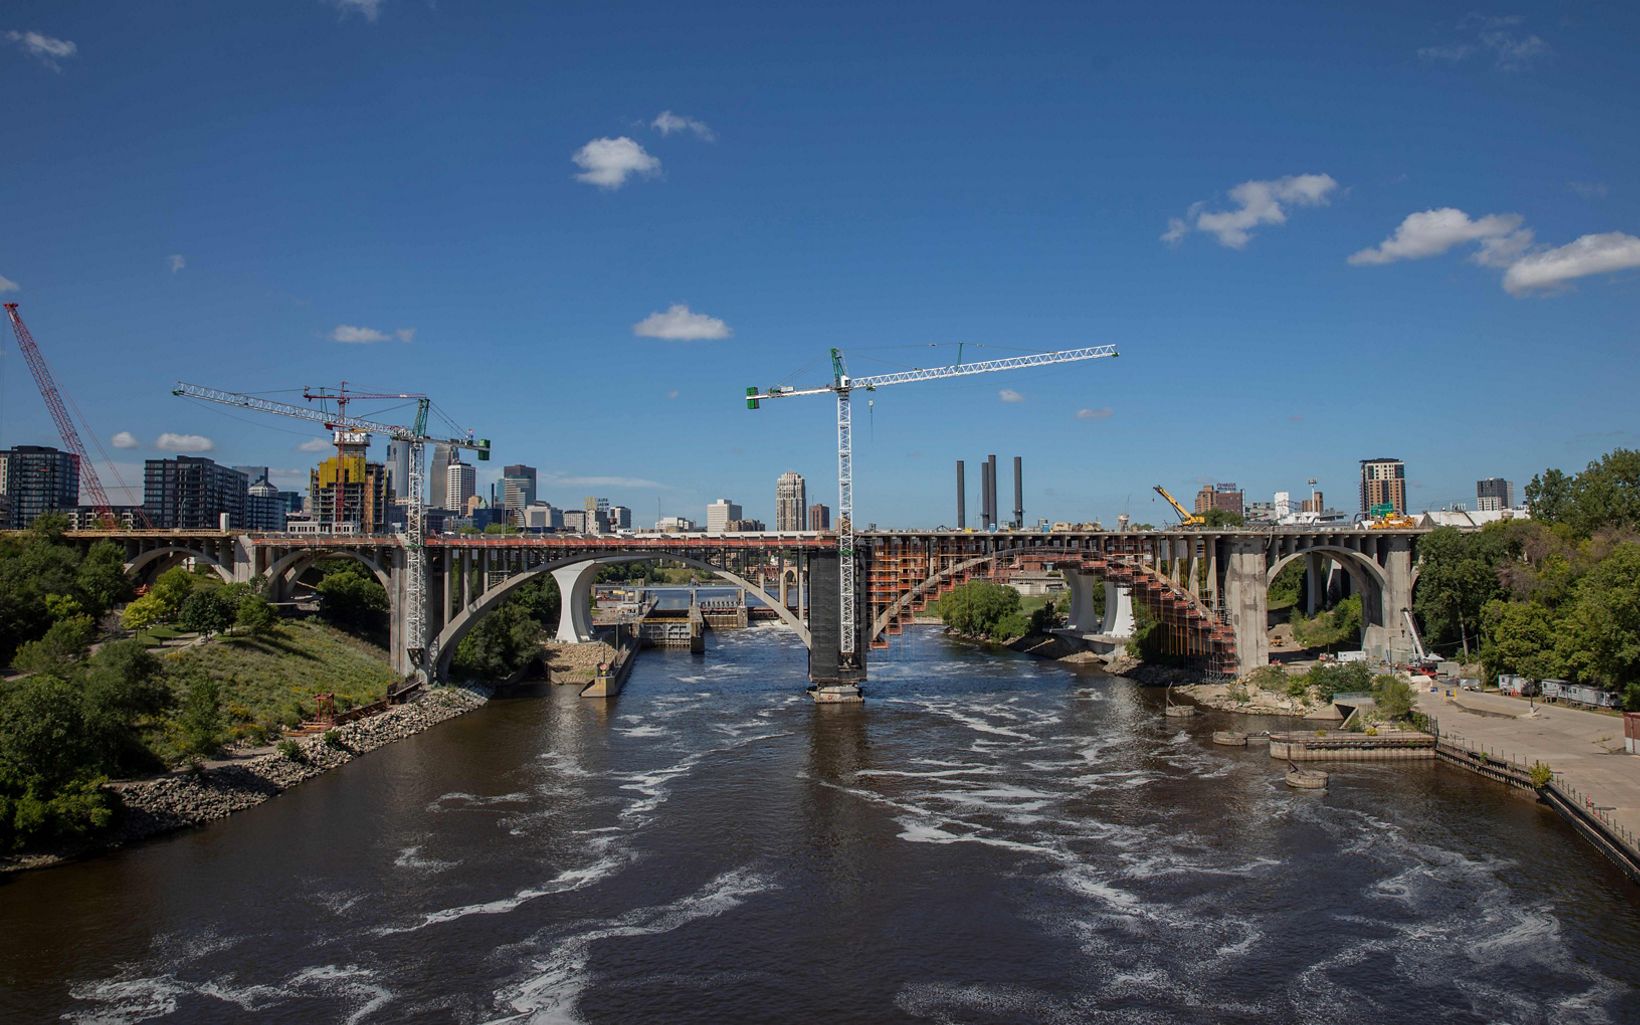 A view of a bridge under construction over the Mississippi River, with downtown Minneapolis in the background.